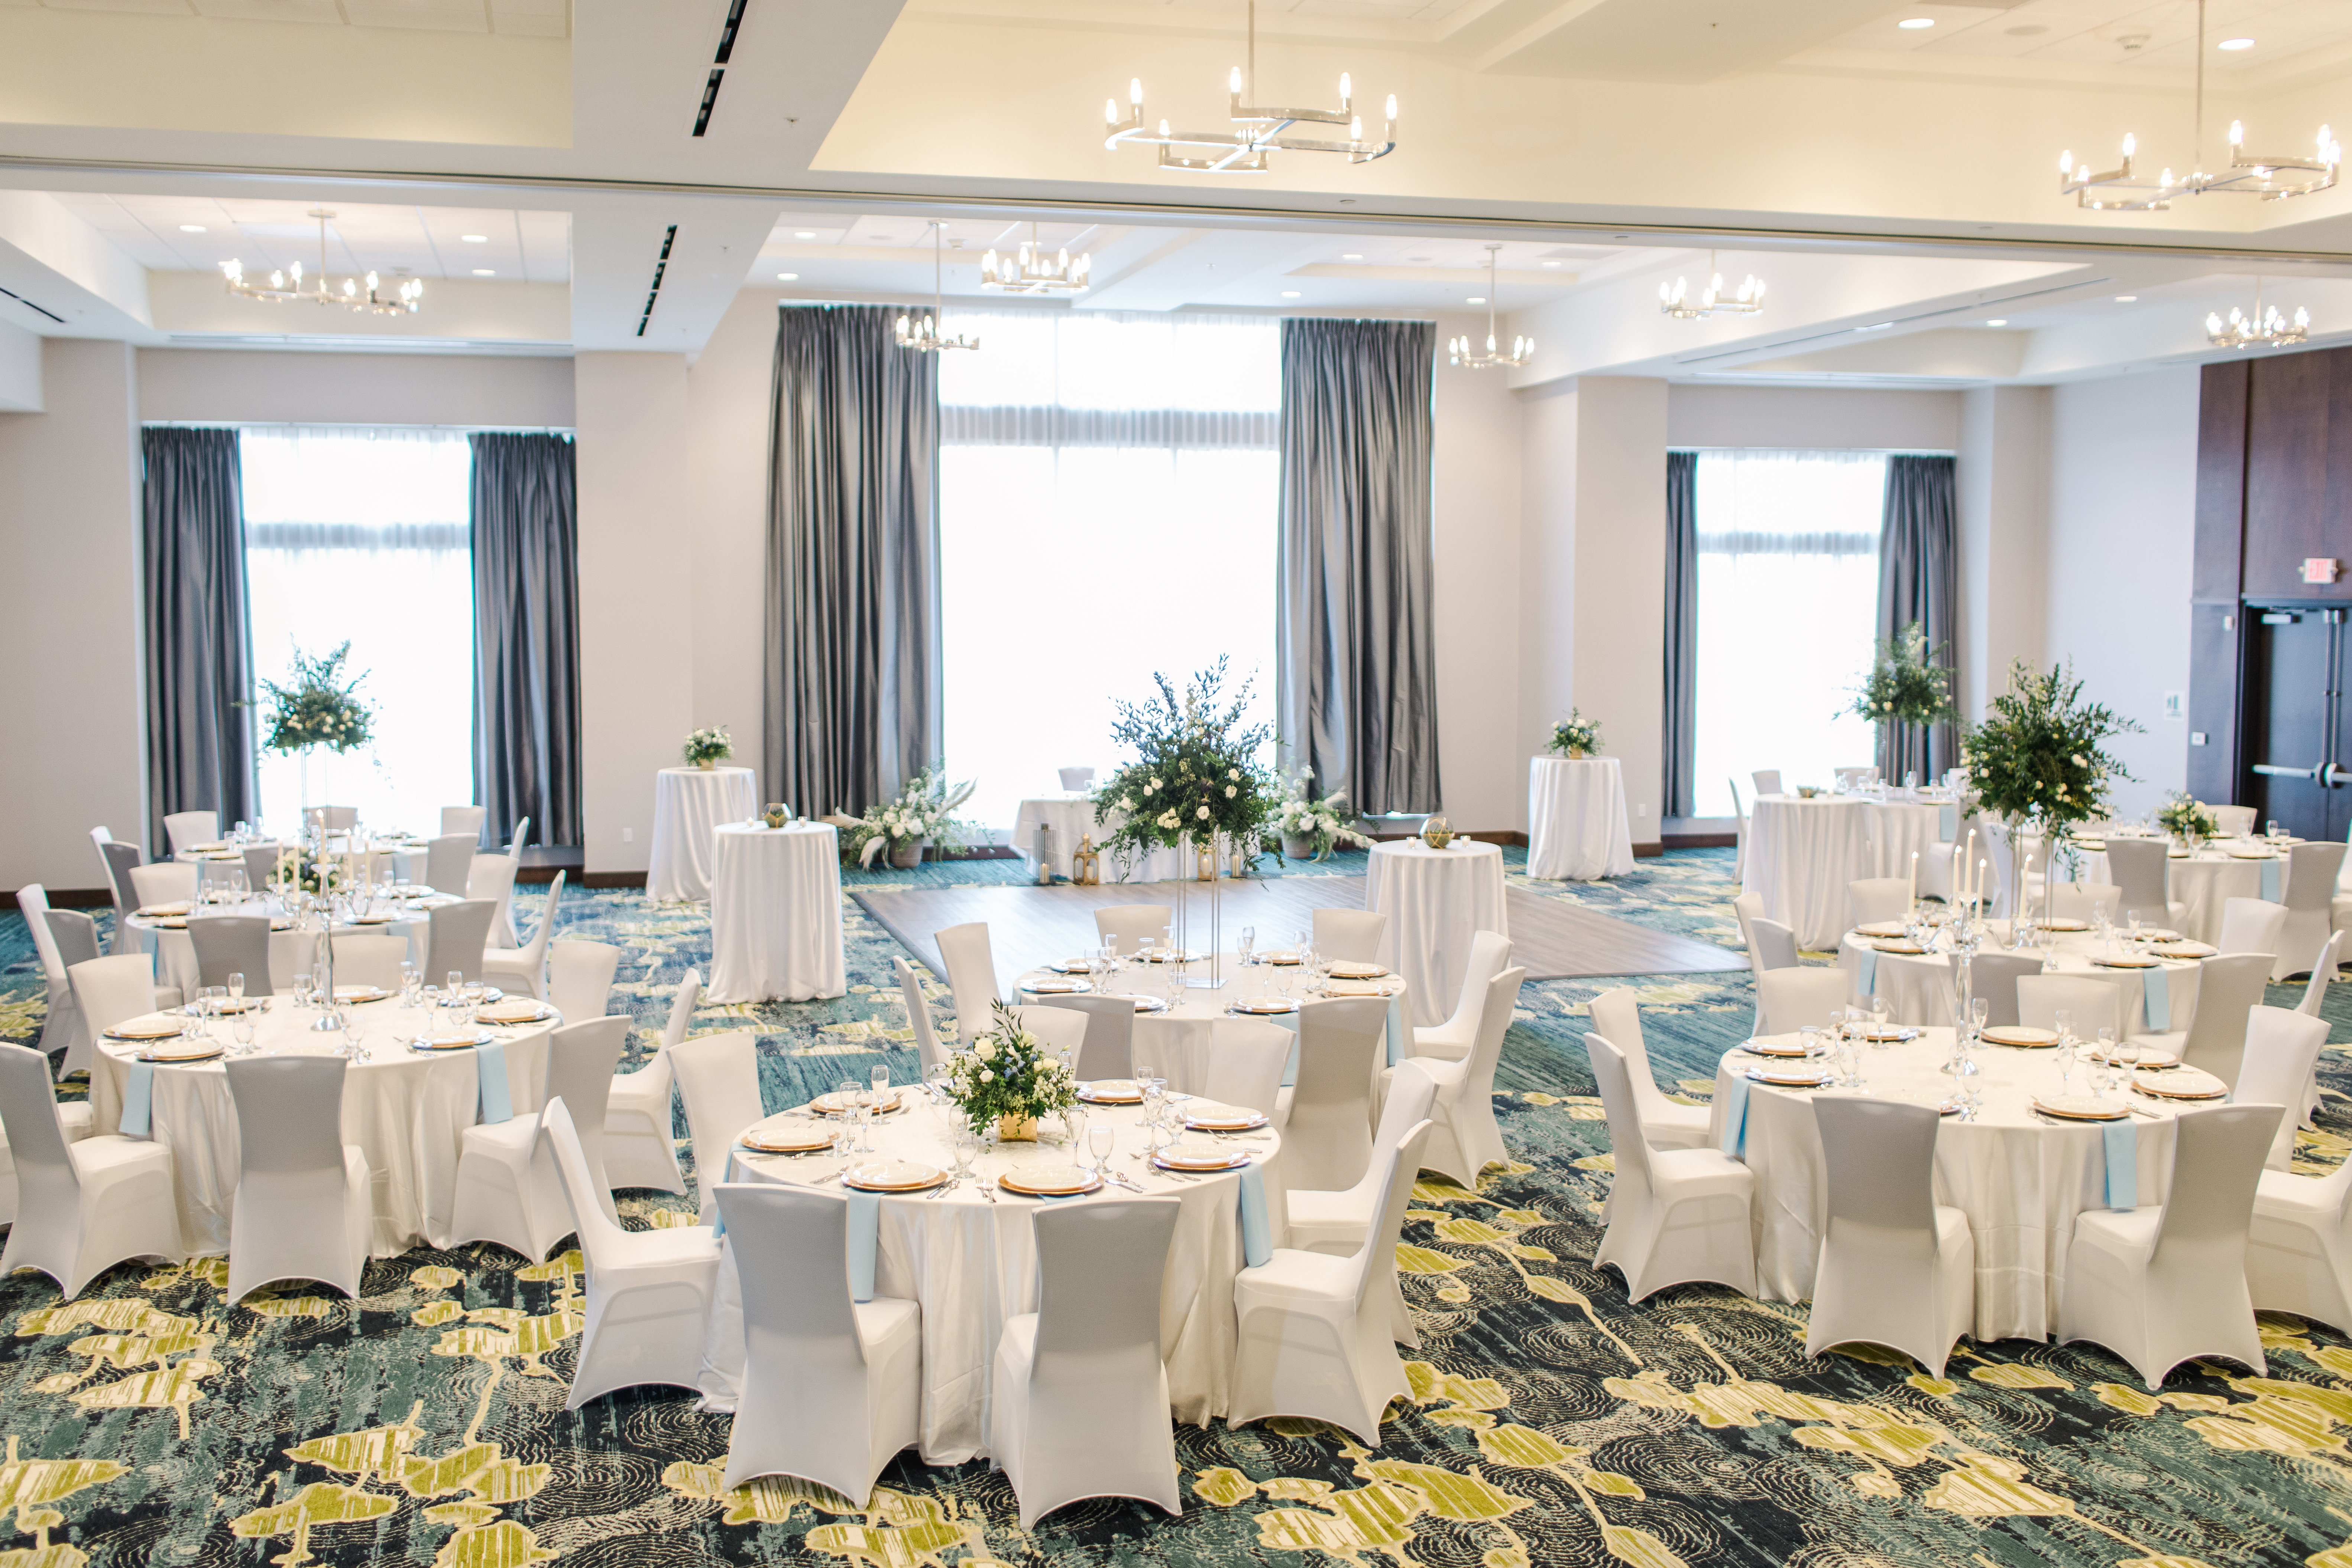 Our modern wedding venue in Livonia is perfect for your day.